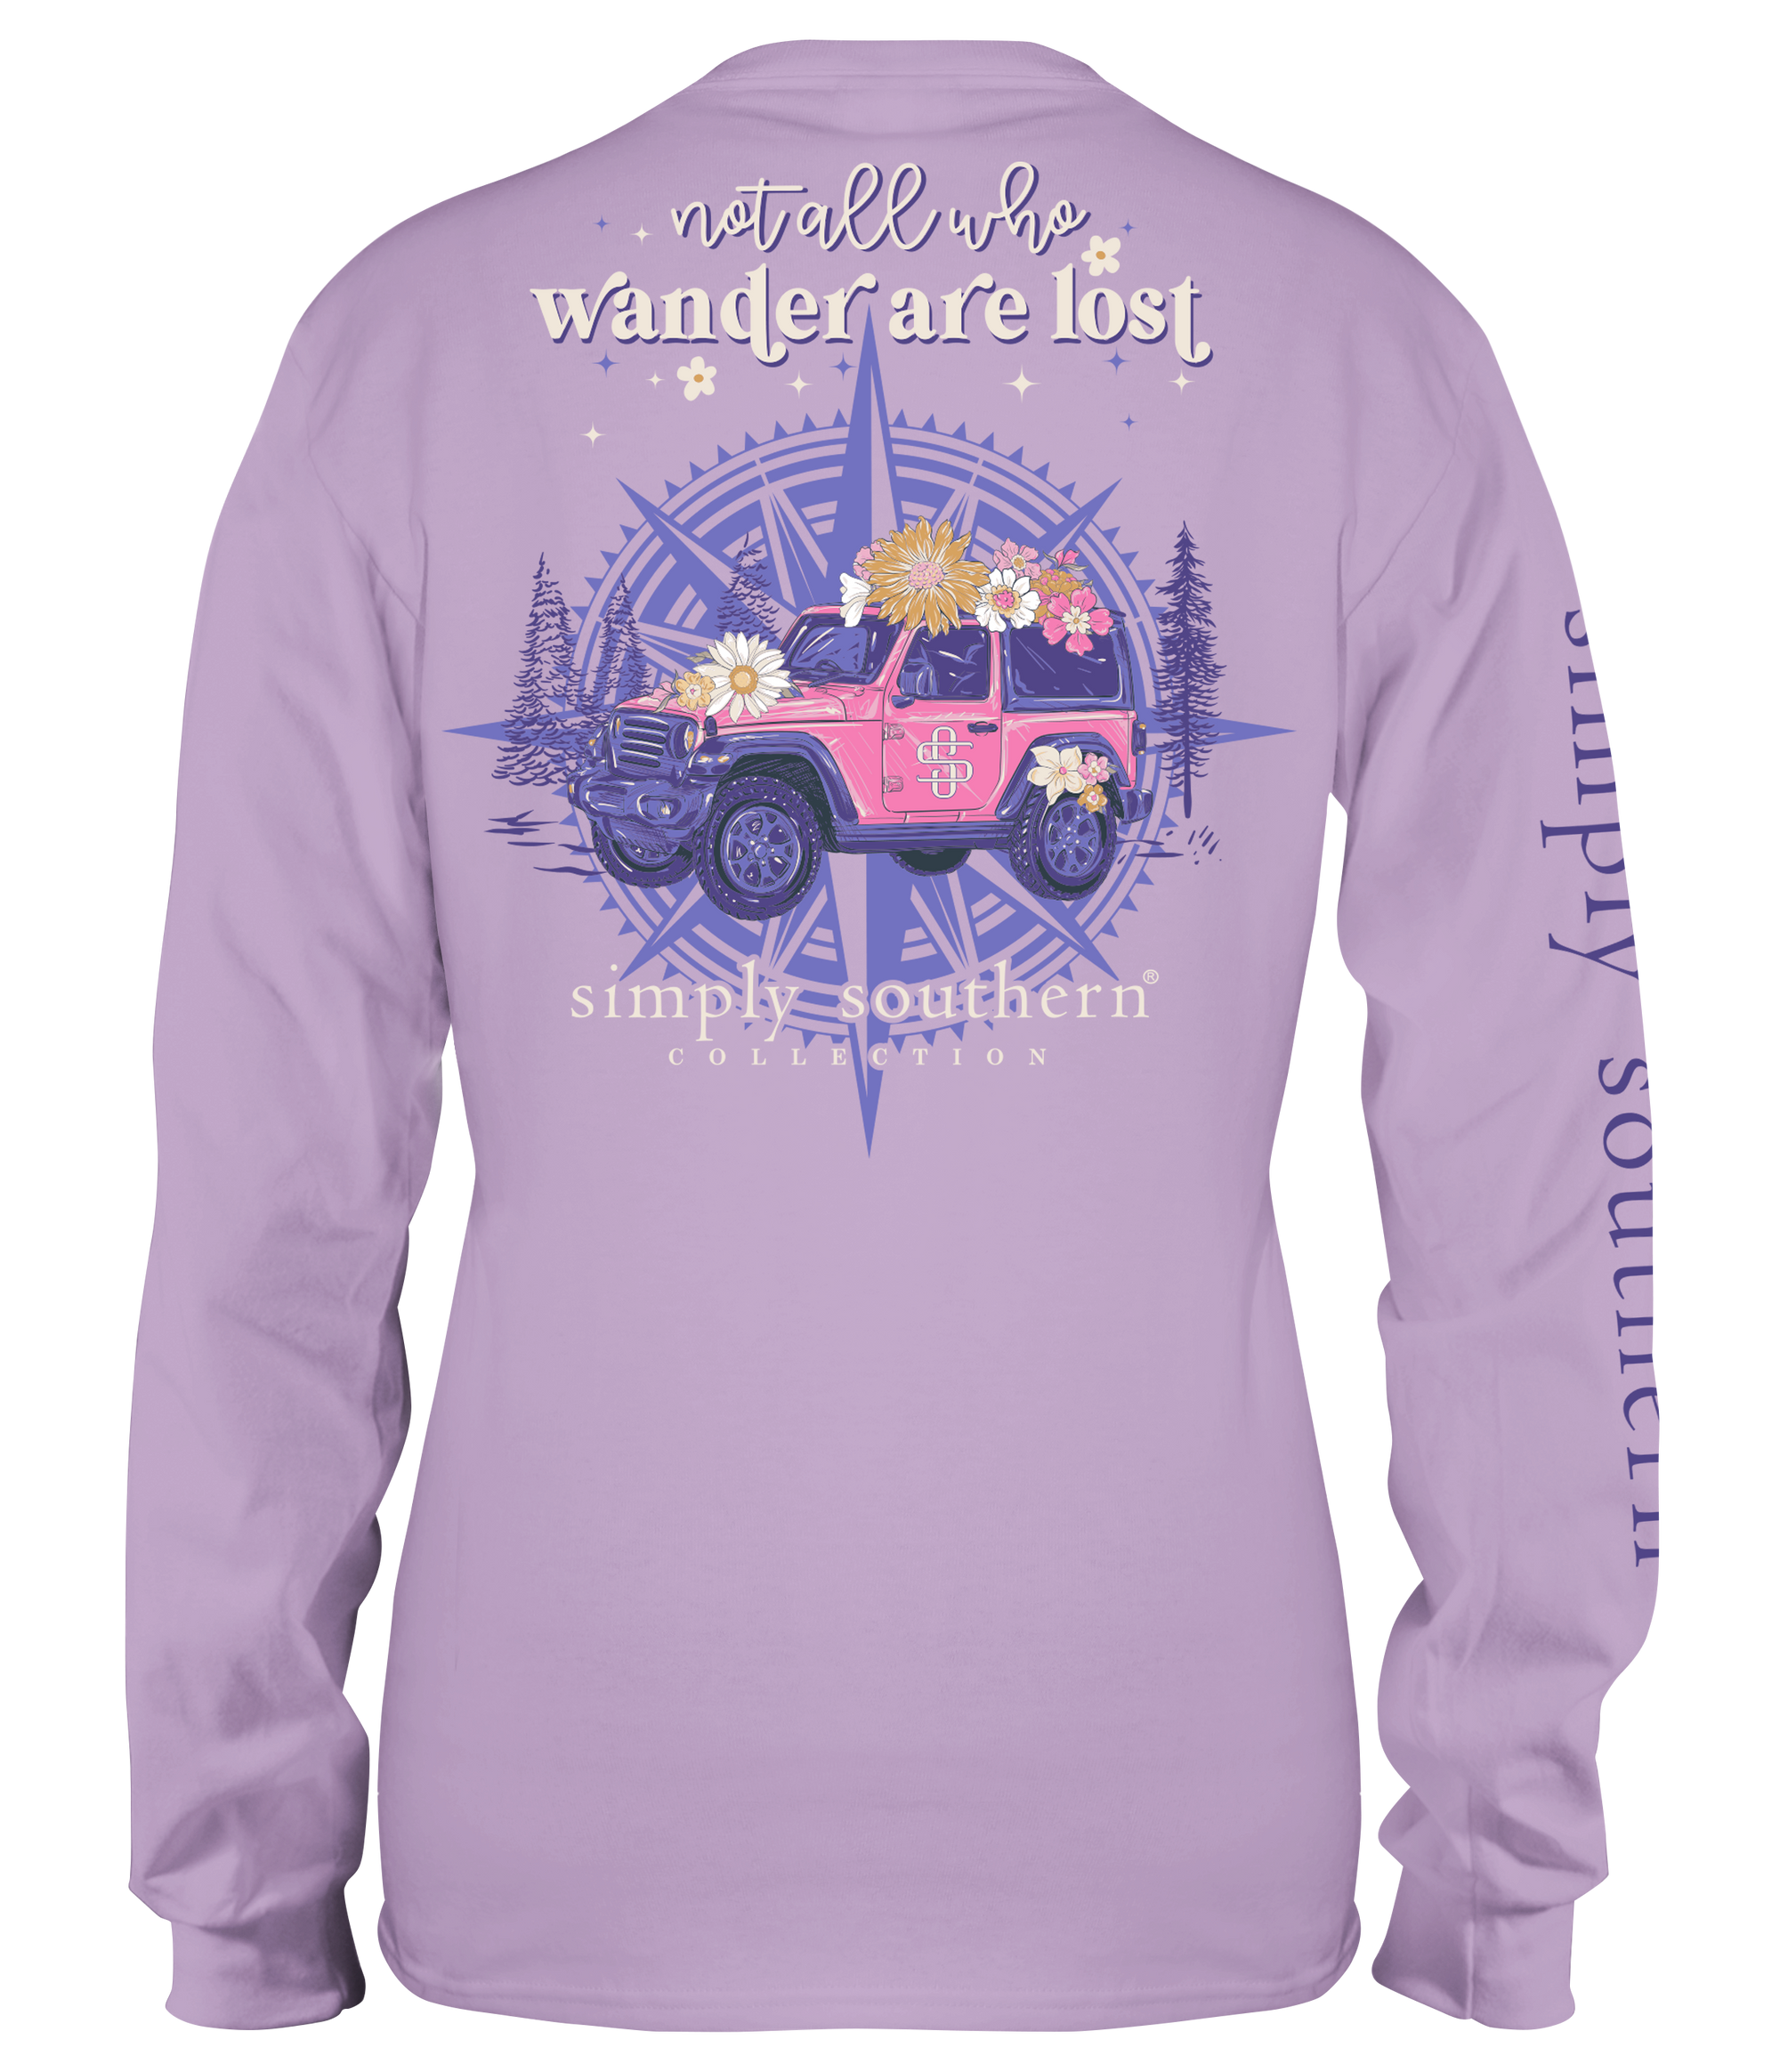 Simply Southern All Who Wander Long Sleeve T-Shirt